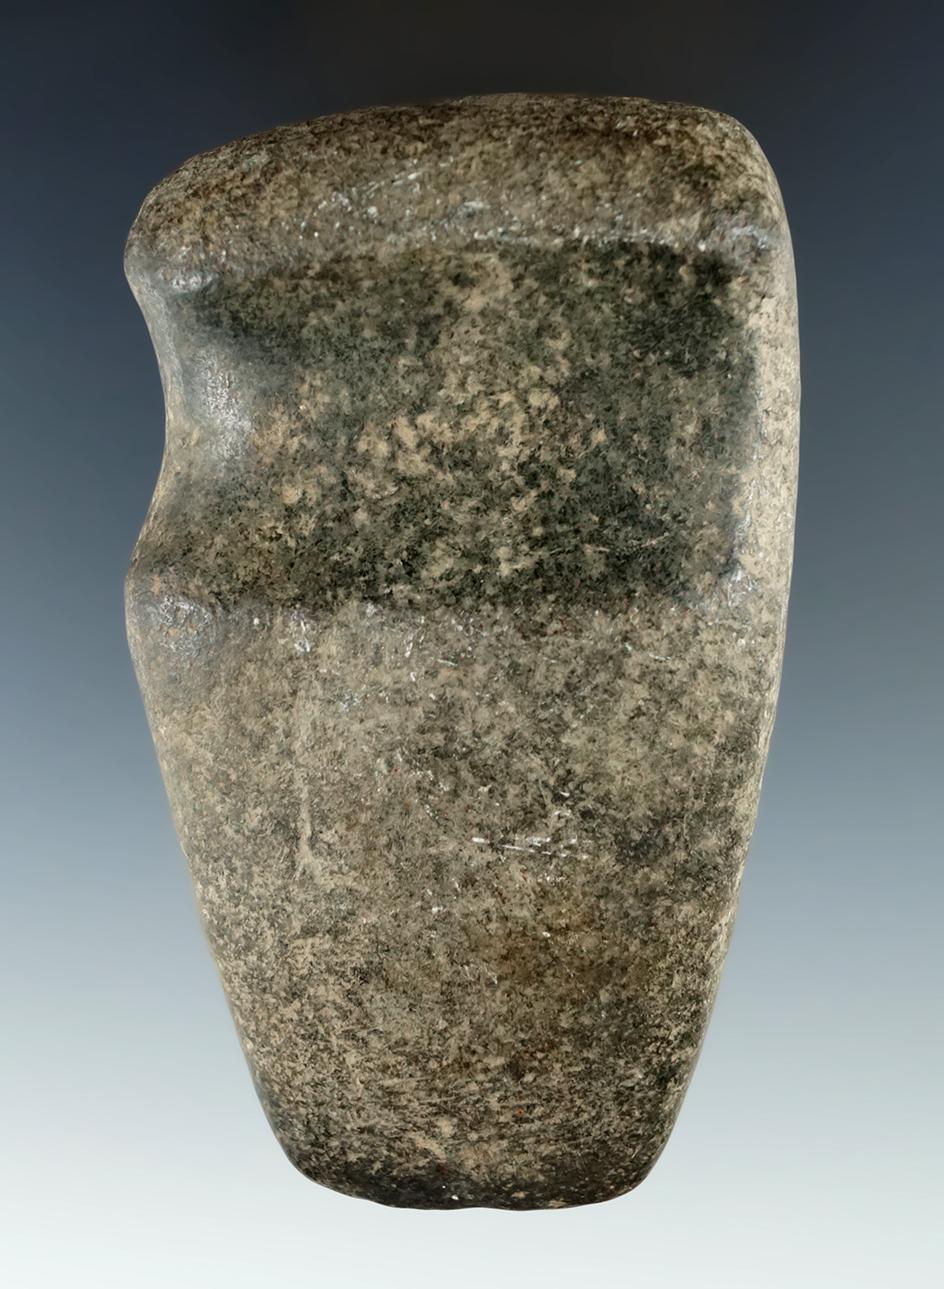 4" Long 3/4 grooved Hardstone Axe in excellent condition found in New York.